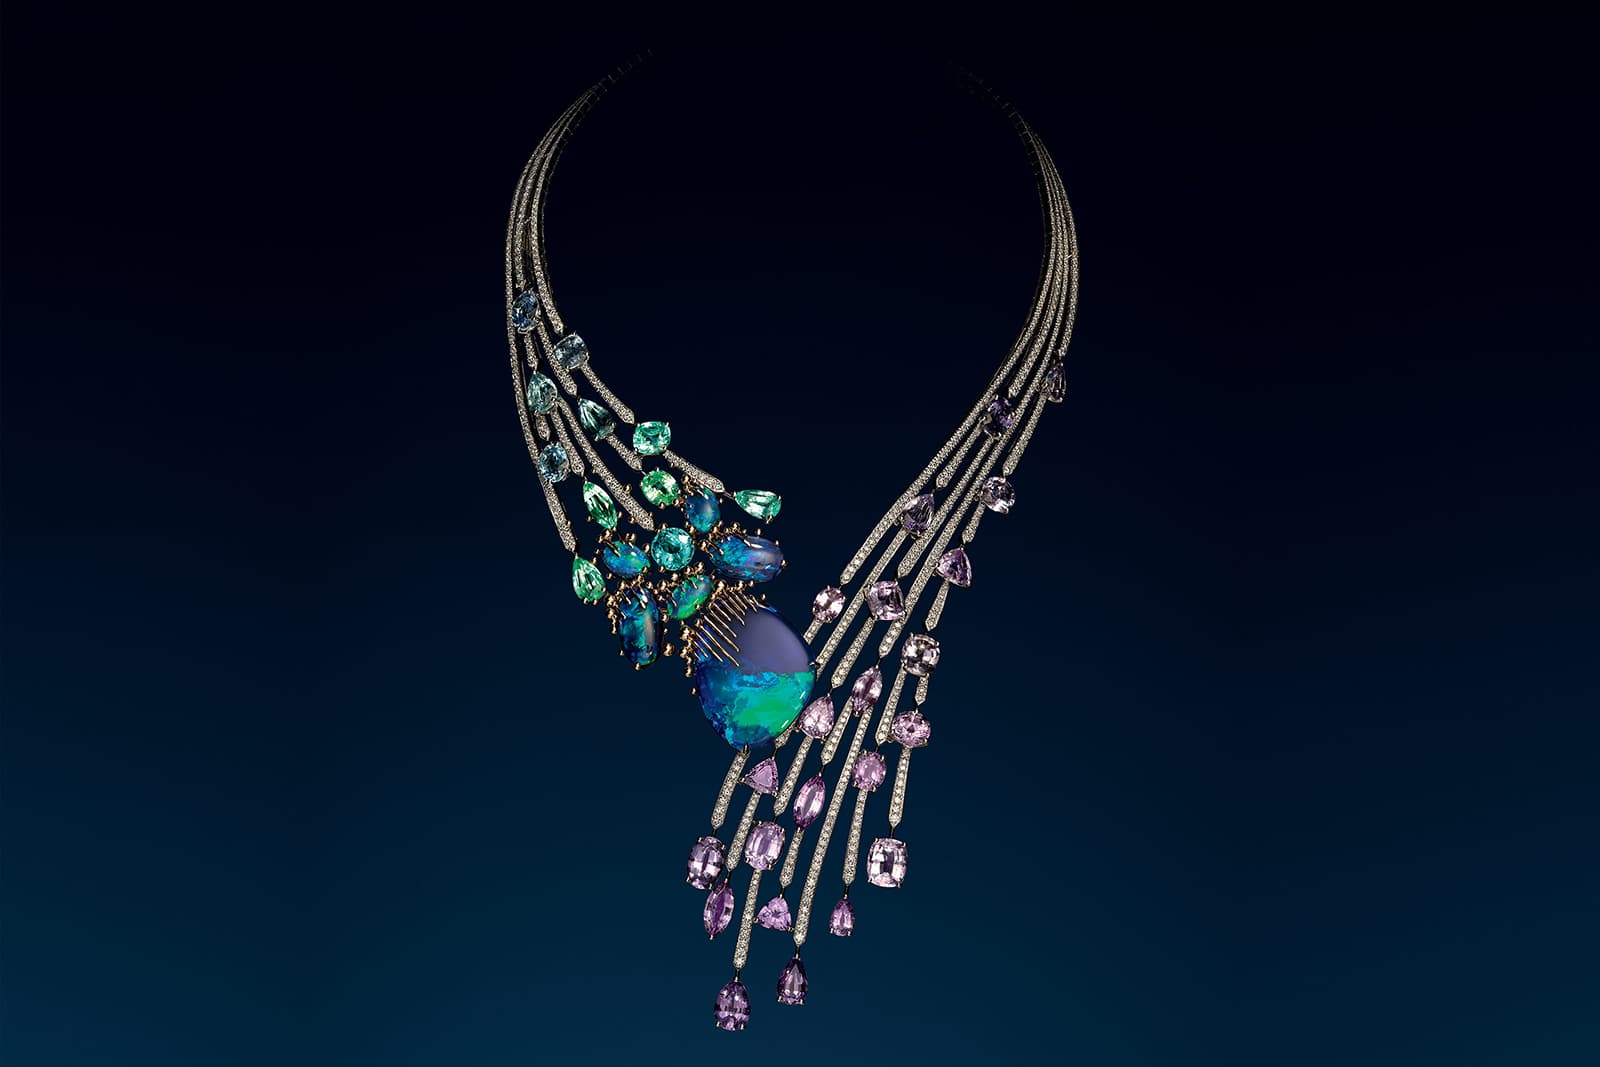 Chaumet 'Les Ciels de Chaumet' collection 'Passages' necklace with 28.11ct Australian black opal, accenting black opals, Paraiba tourmalines, tourmalines and diamonds in rose and white gold